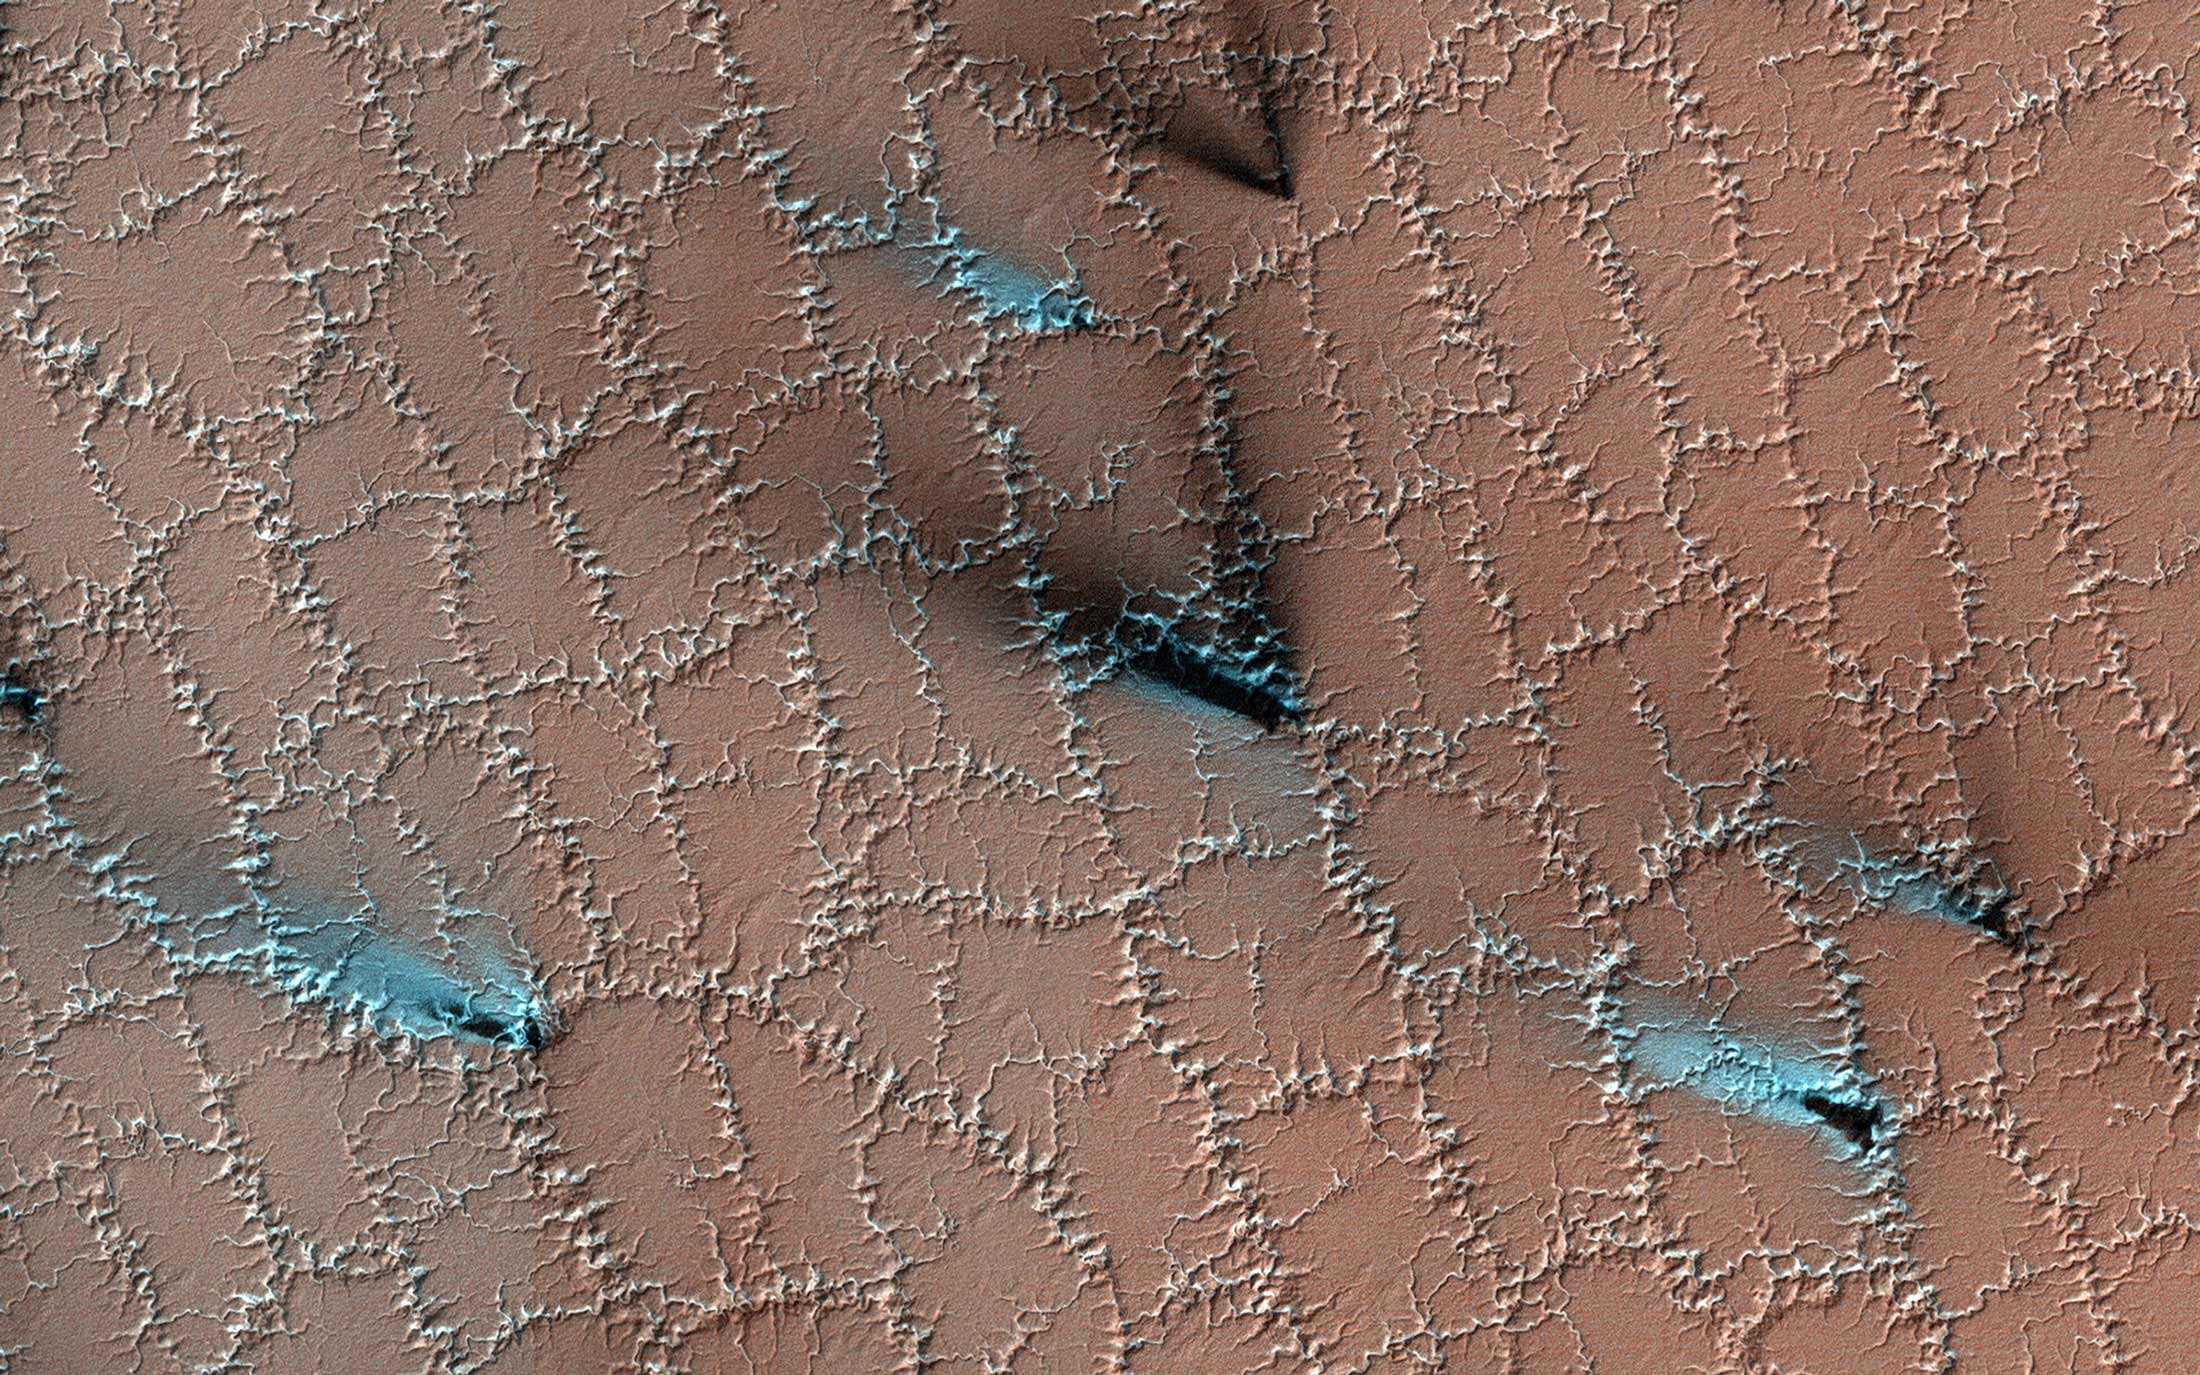 Frozen water on the surface of Mars splits the ground open into polygons, creating a strange but beautiful pattern in this image released by NASA on June 26.